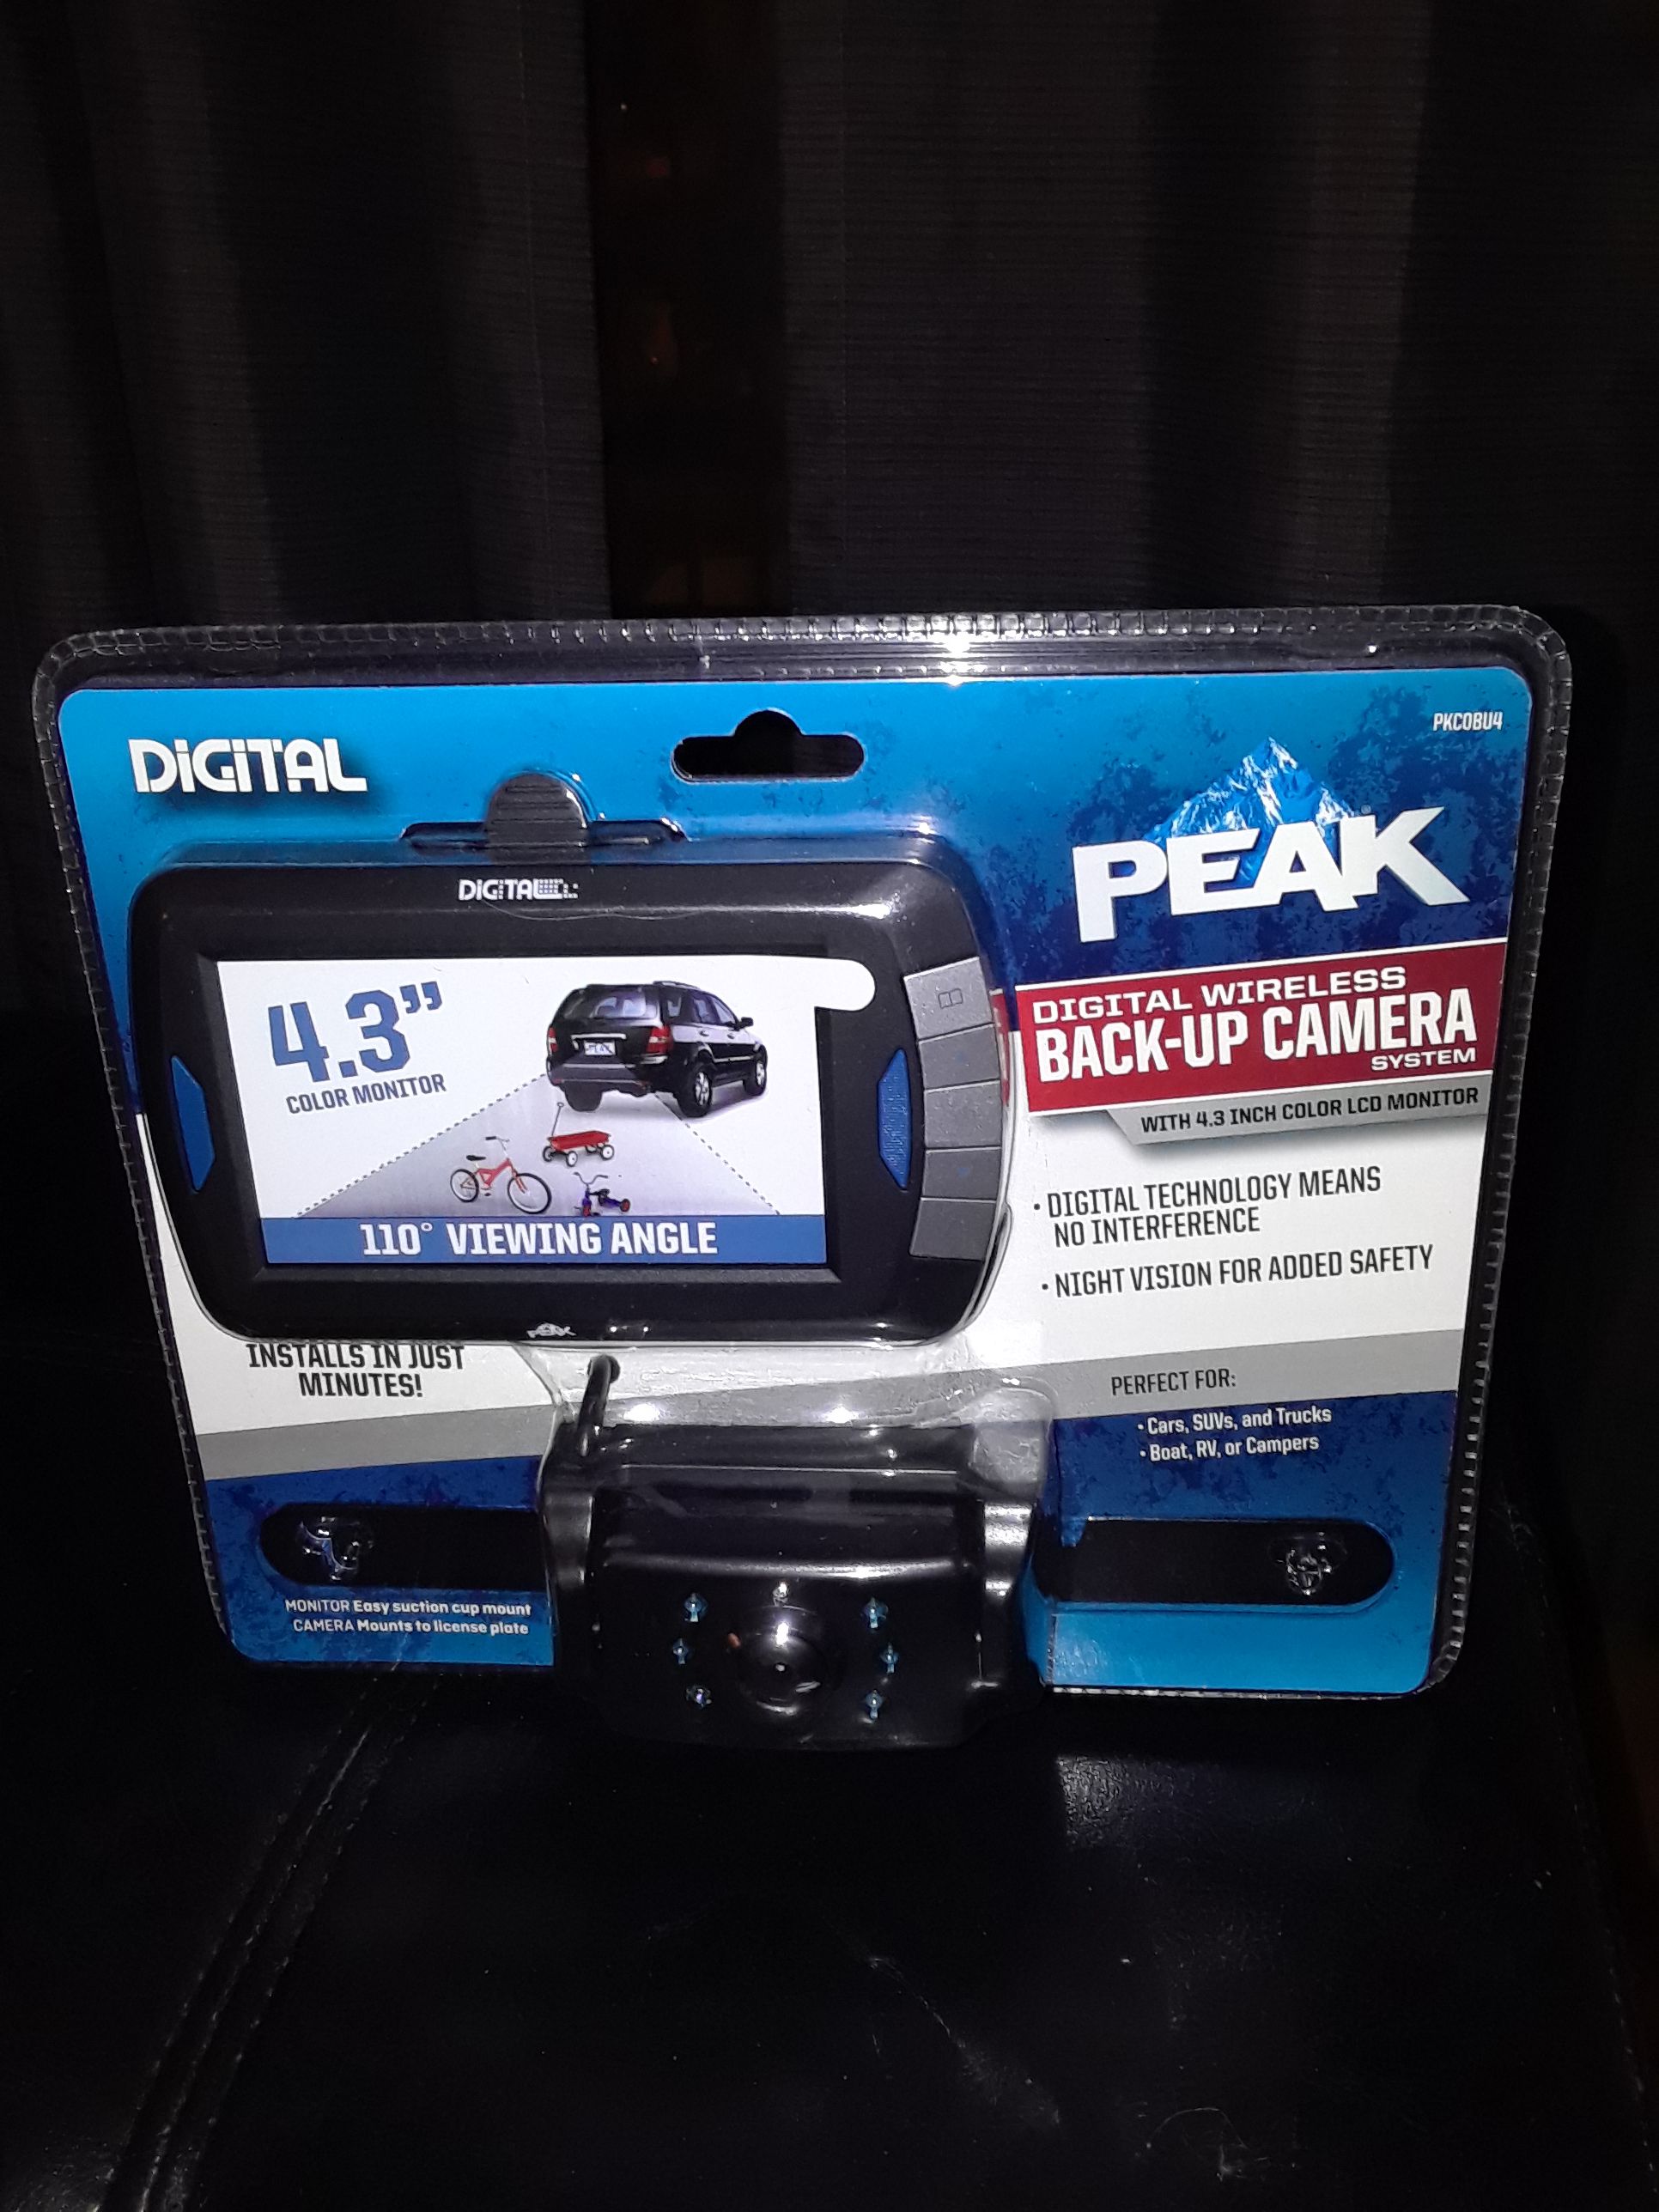 Back up camera -(new in box unopened)priced to sell!!